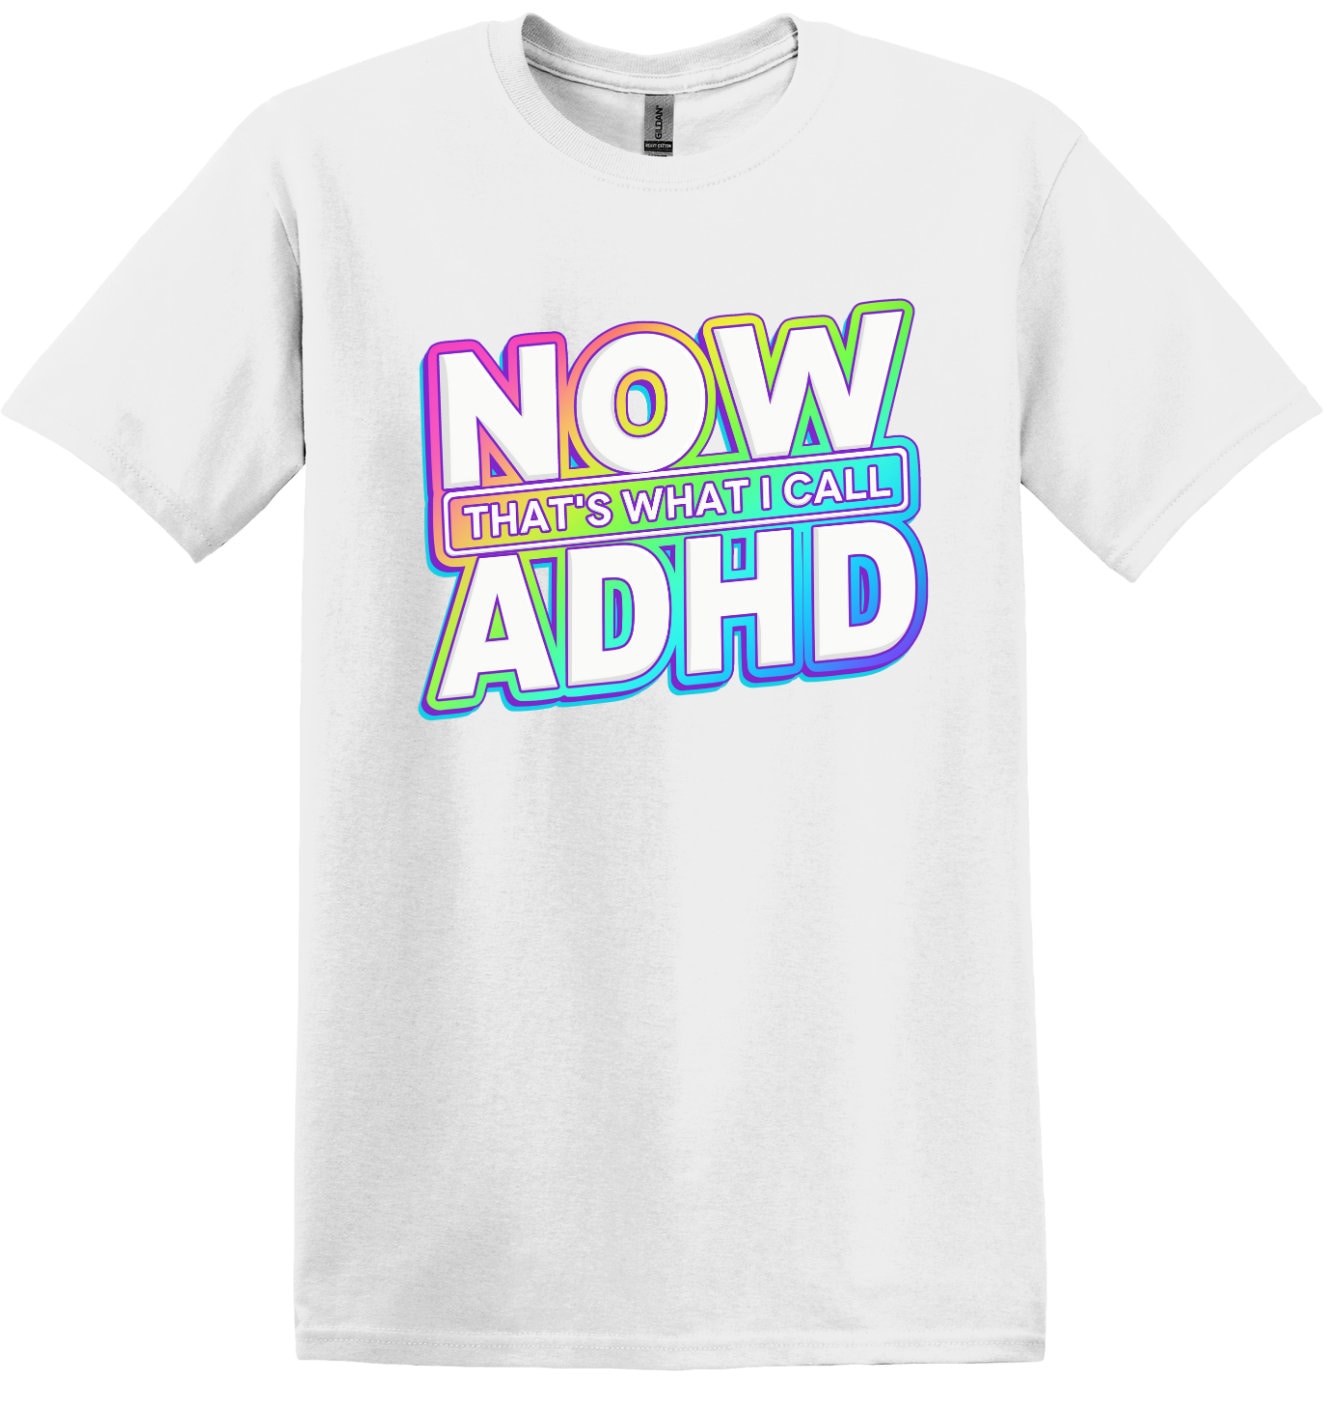 Now That's What I Call ADHD, Funny Cotton T-Shirt, Adult Tee